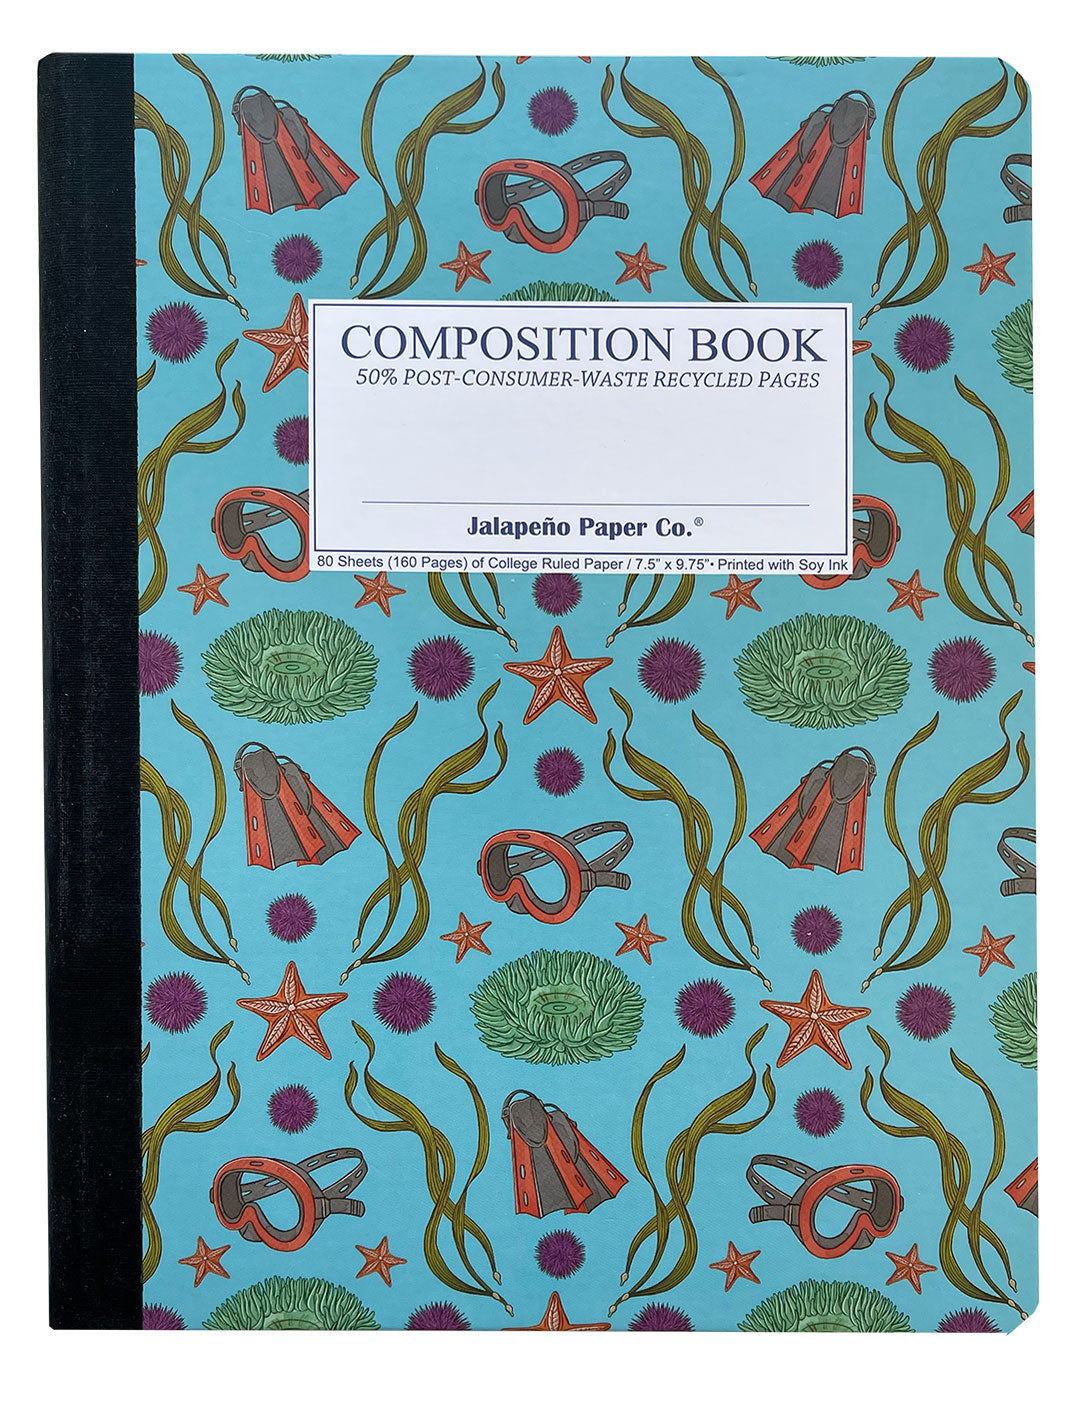 Composition notebook printed with snorkeling gear and sea urchins on blue